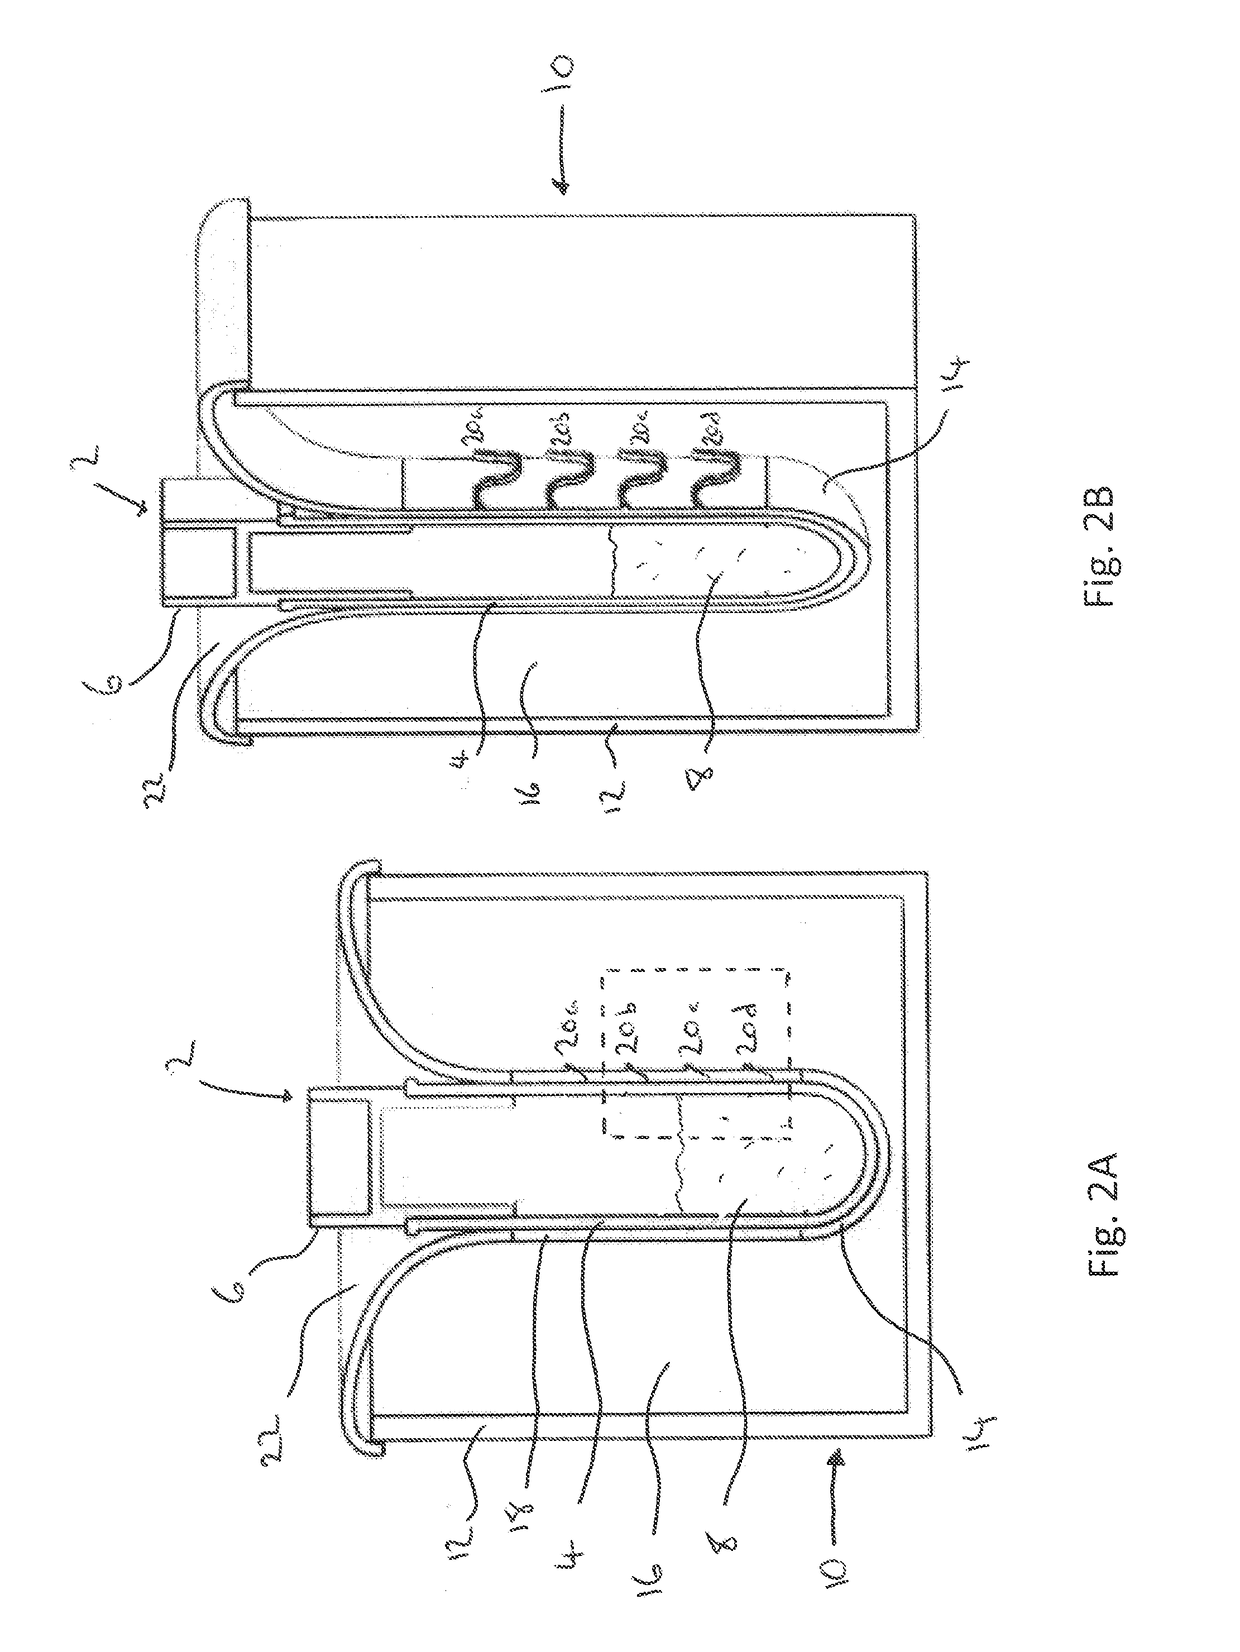 Thawing methods and apparatus